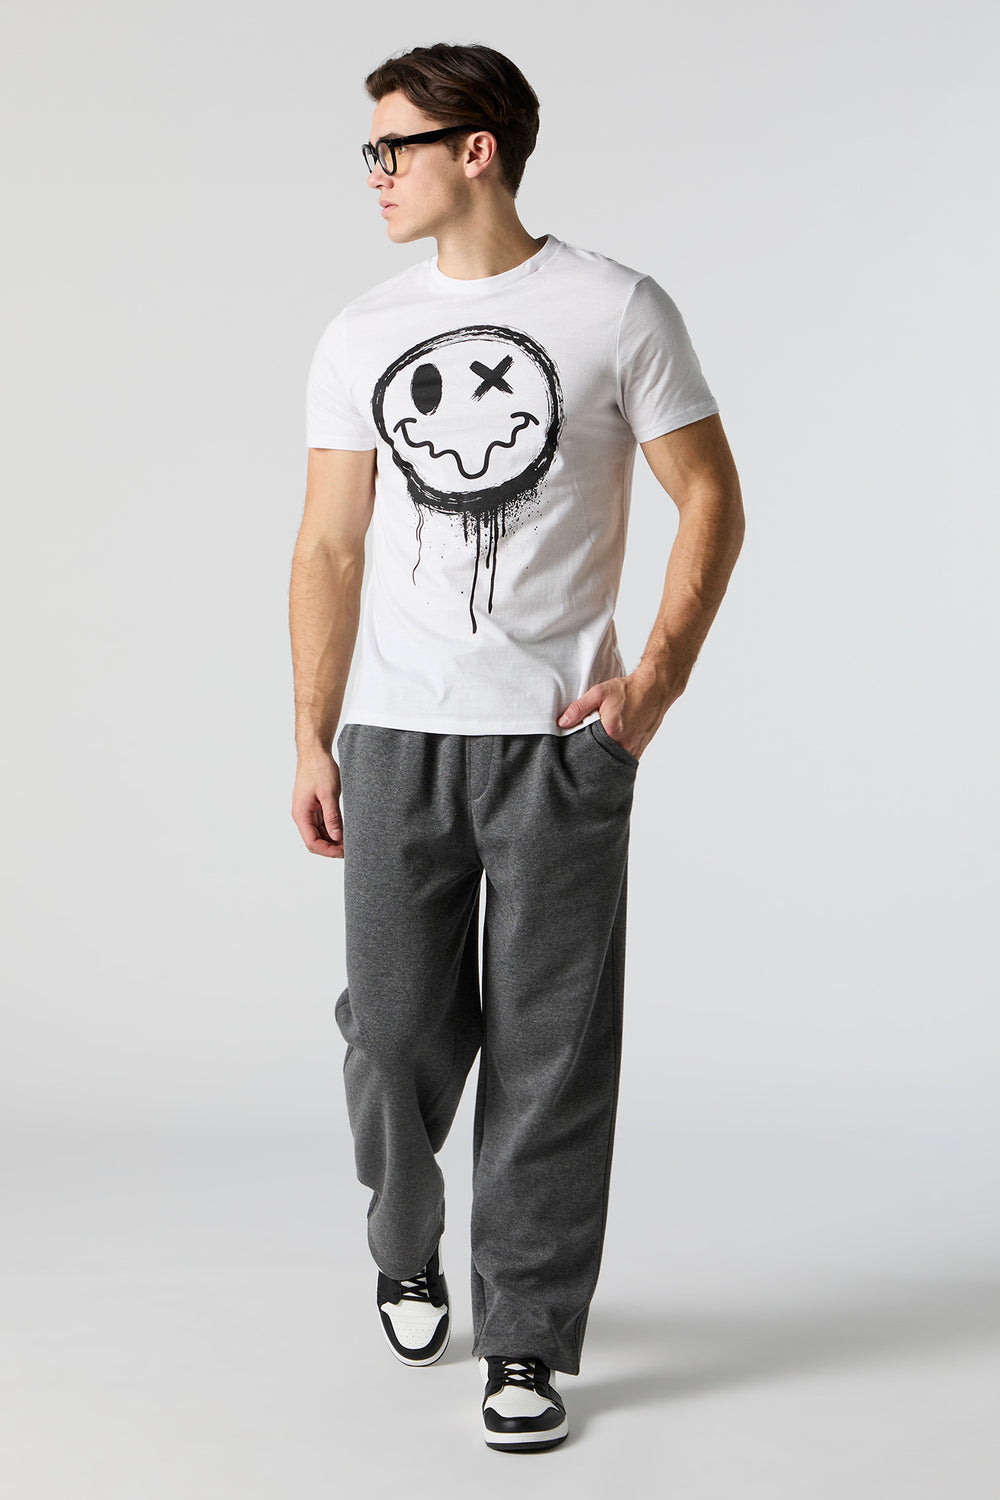 Distorted Smiley Graphic T-Shirt Distorted Smiley Graphic T-Shirt 3